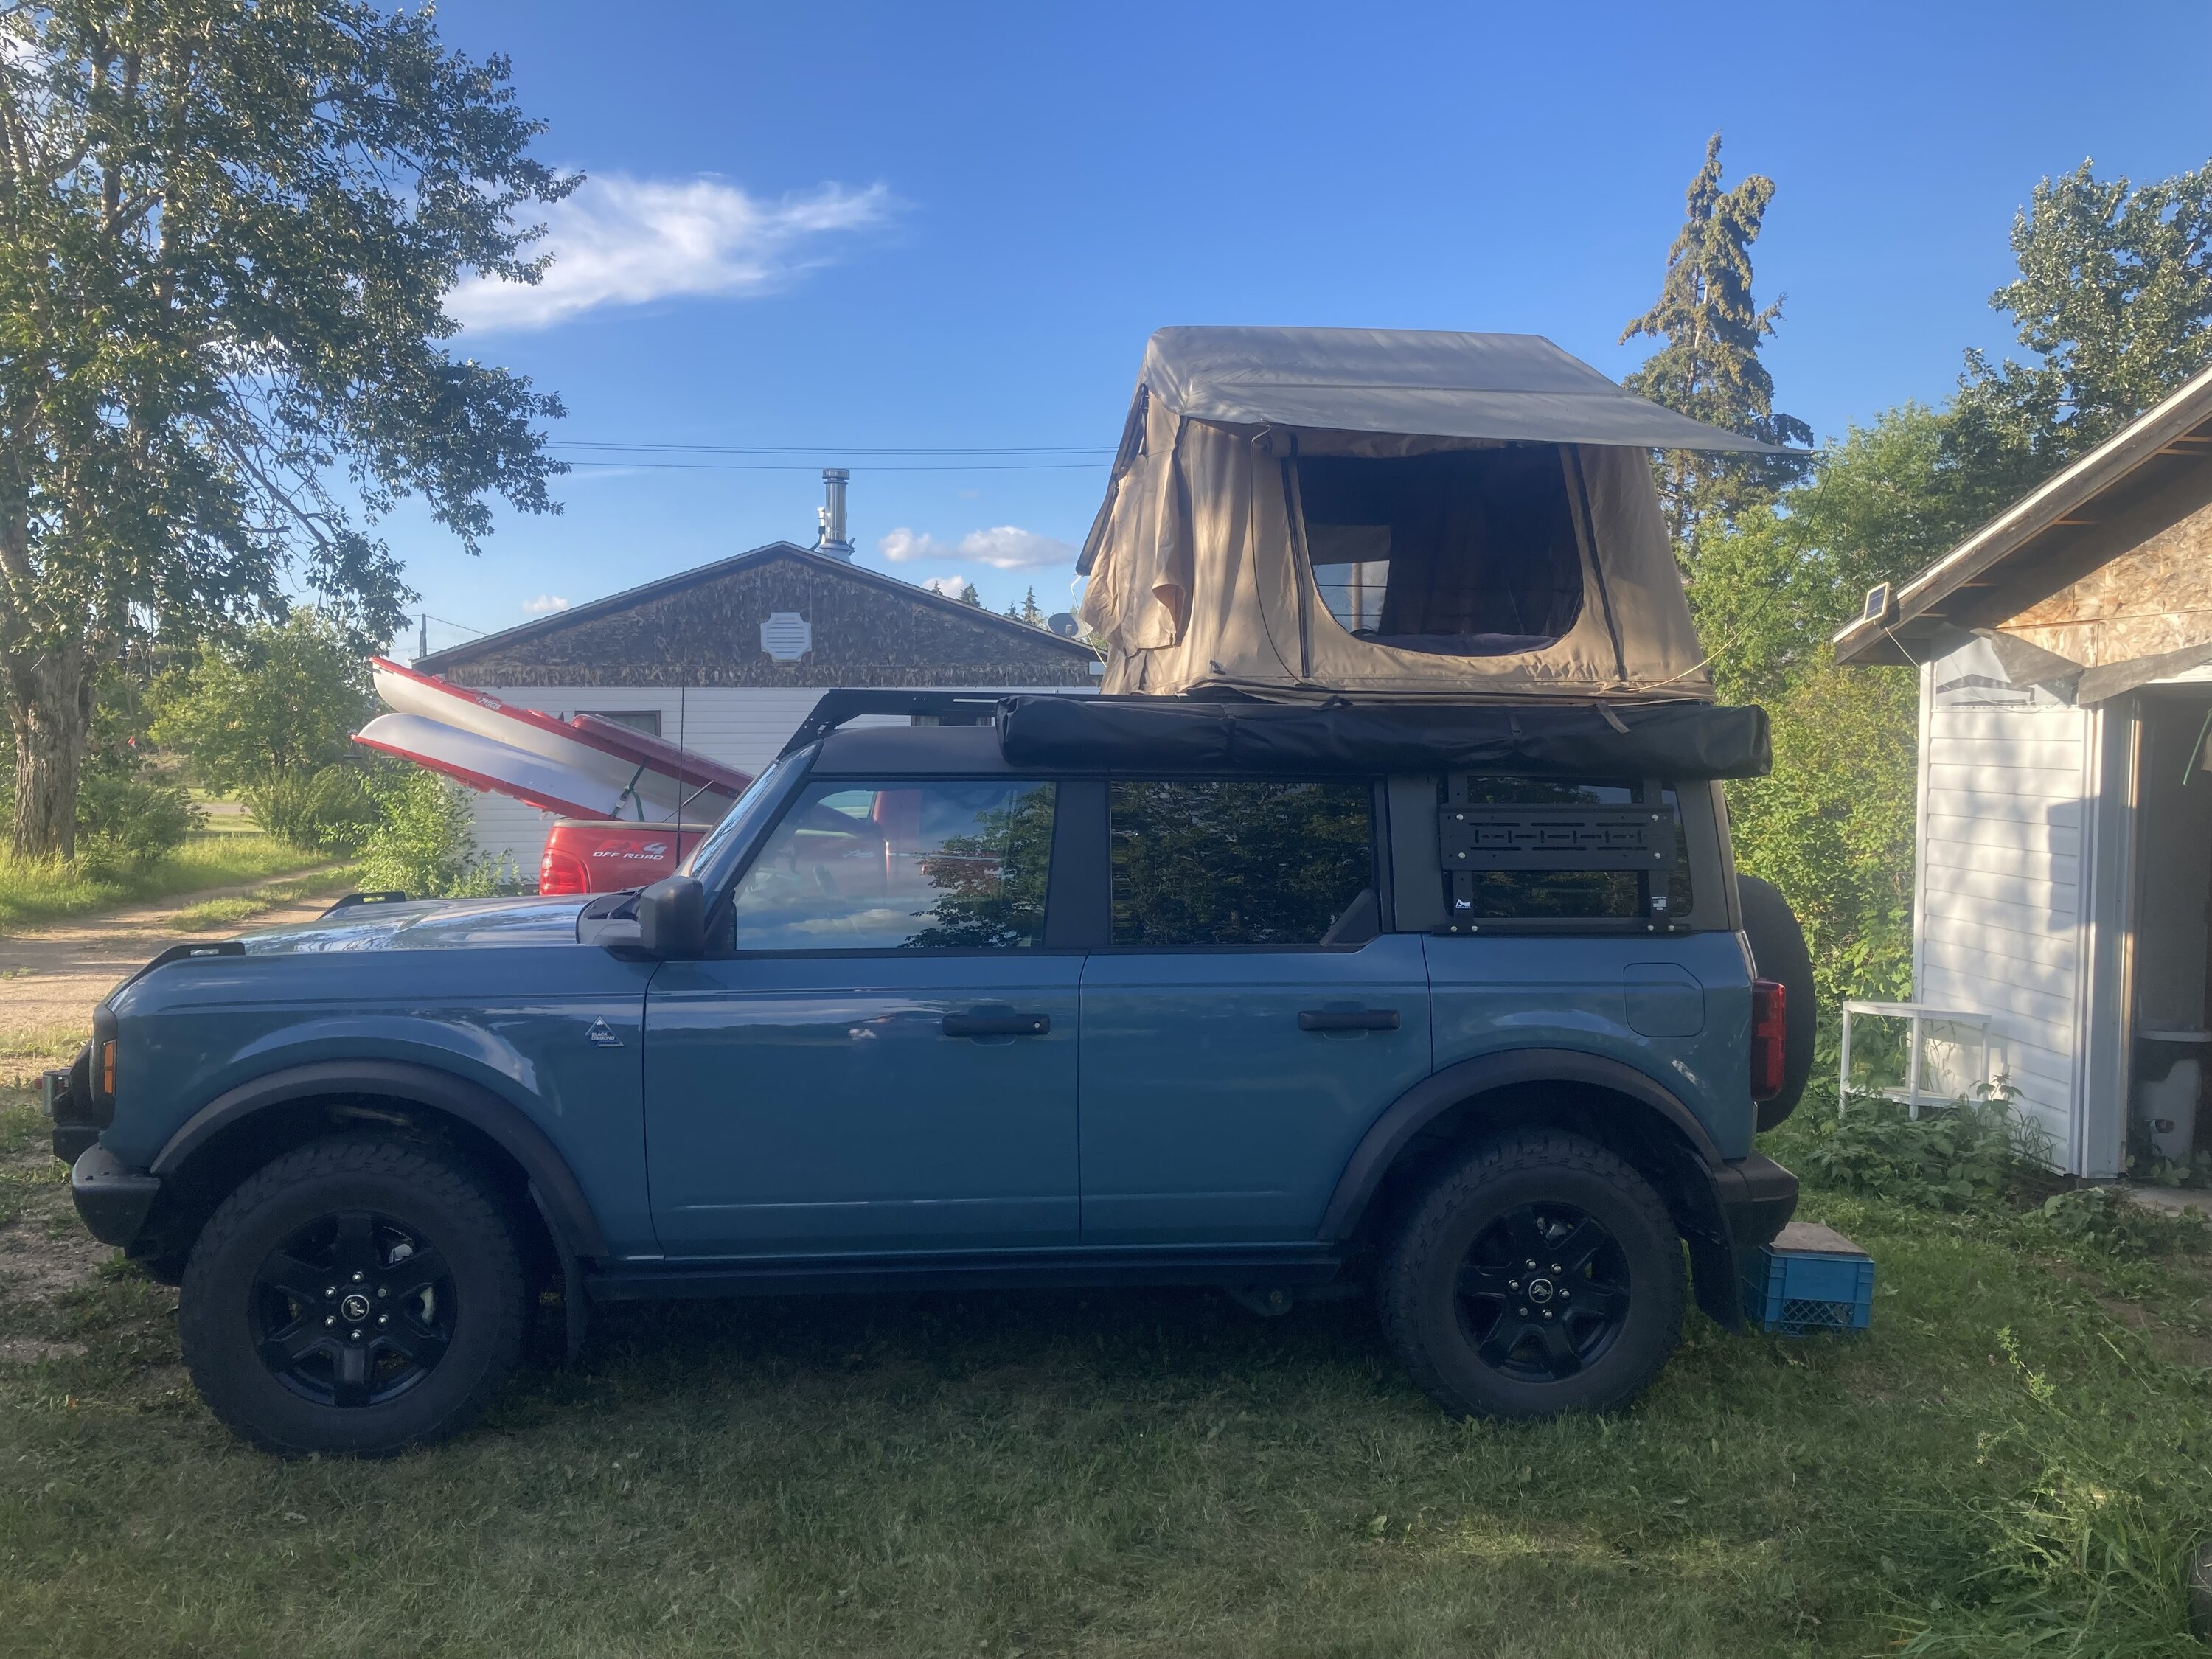 Ford Bronco Let's see your roof-top Tents and camping setups! RTT Closed4